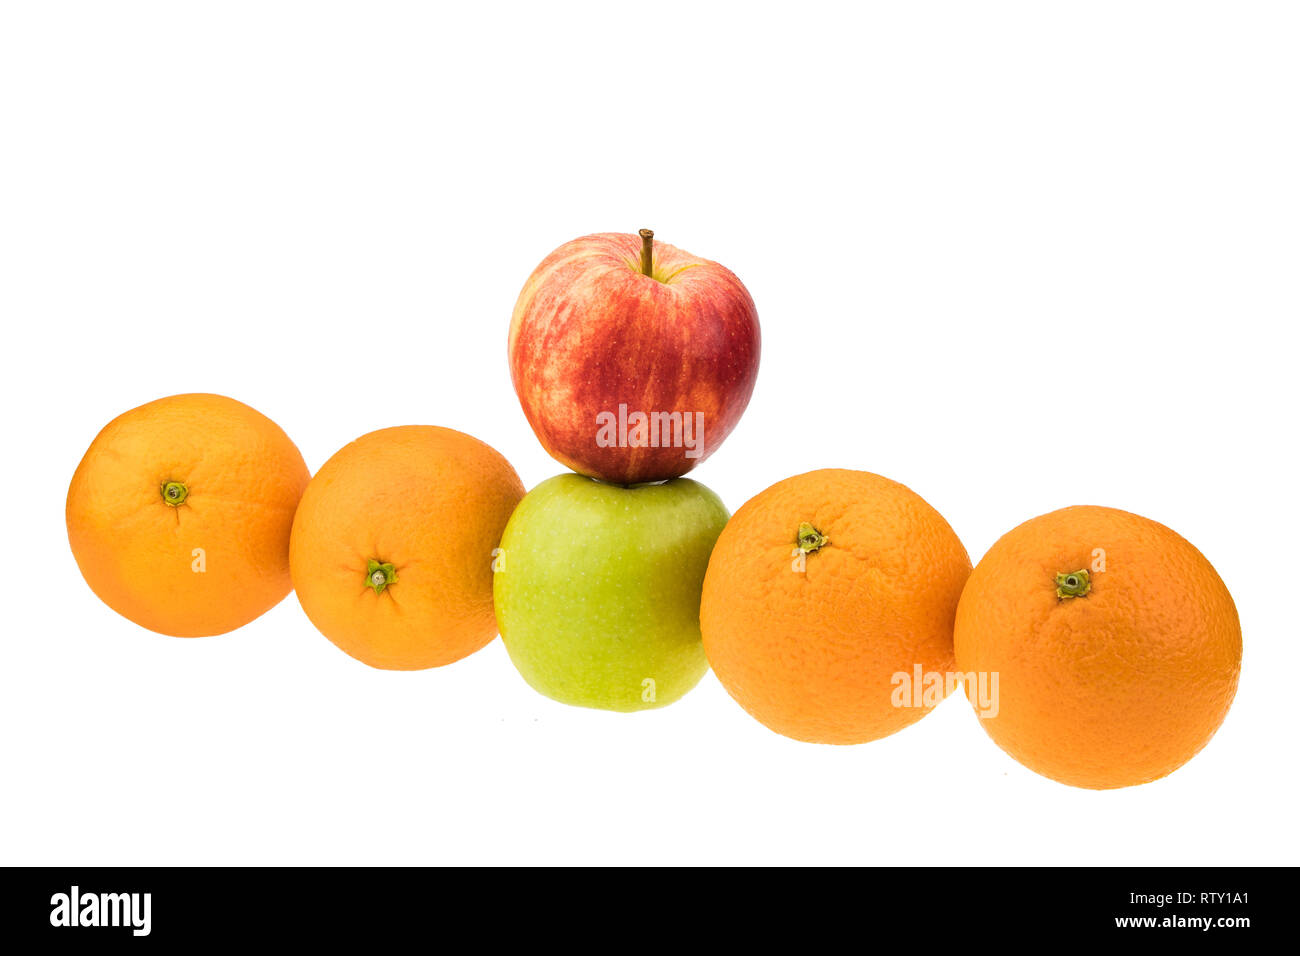 Compare apples with oranges Stock Photo